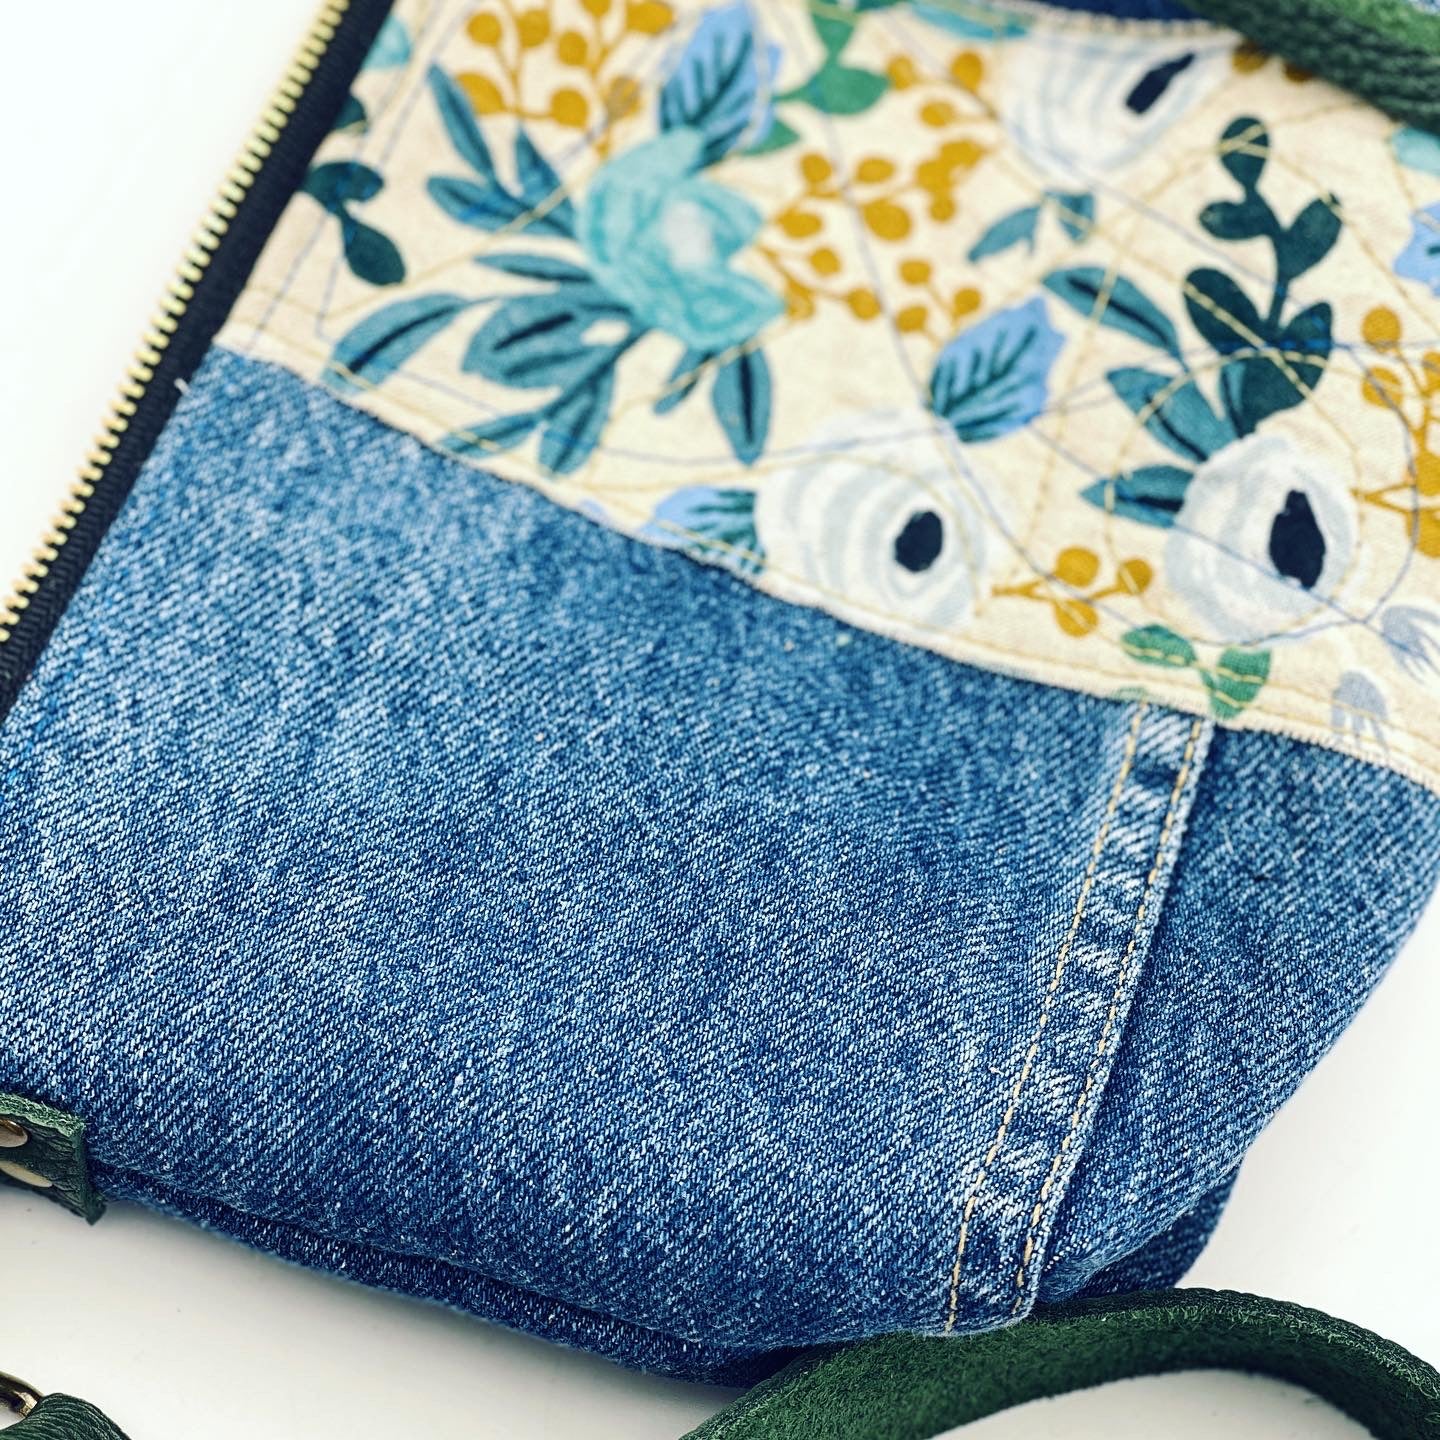 Upcycled Denim/Rifle Paper Co Floral Canvas Pouch – Songbird